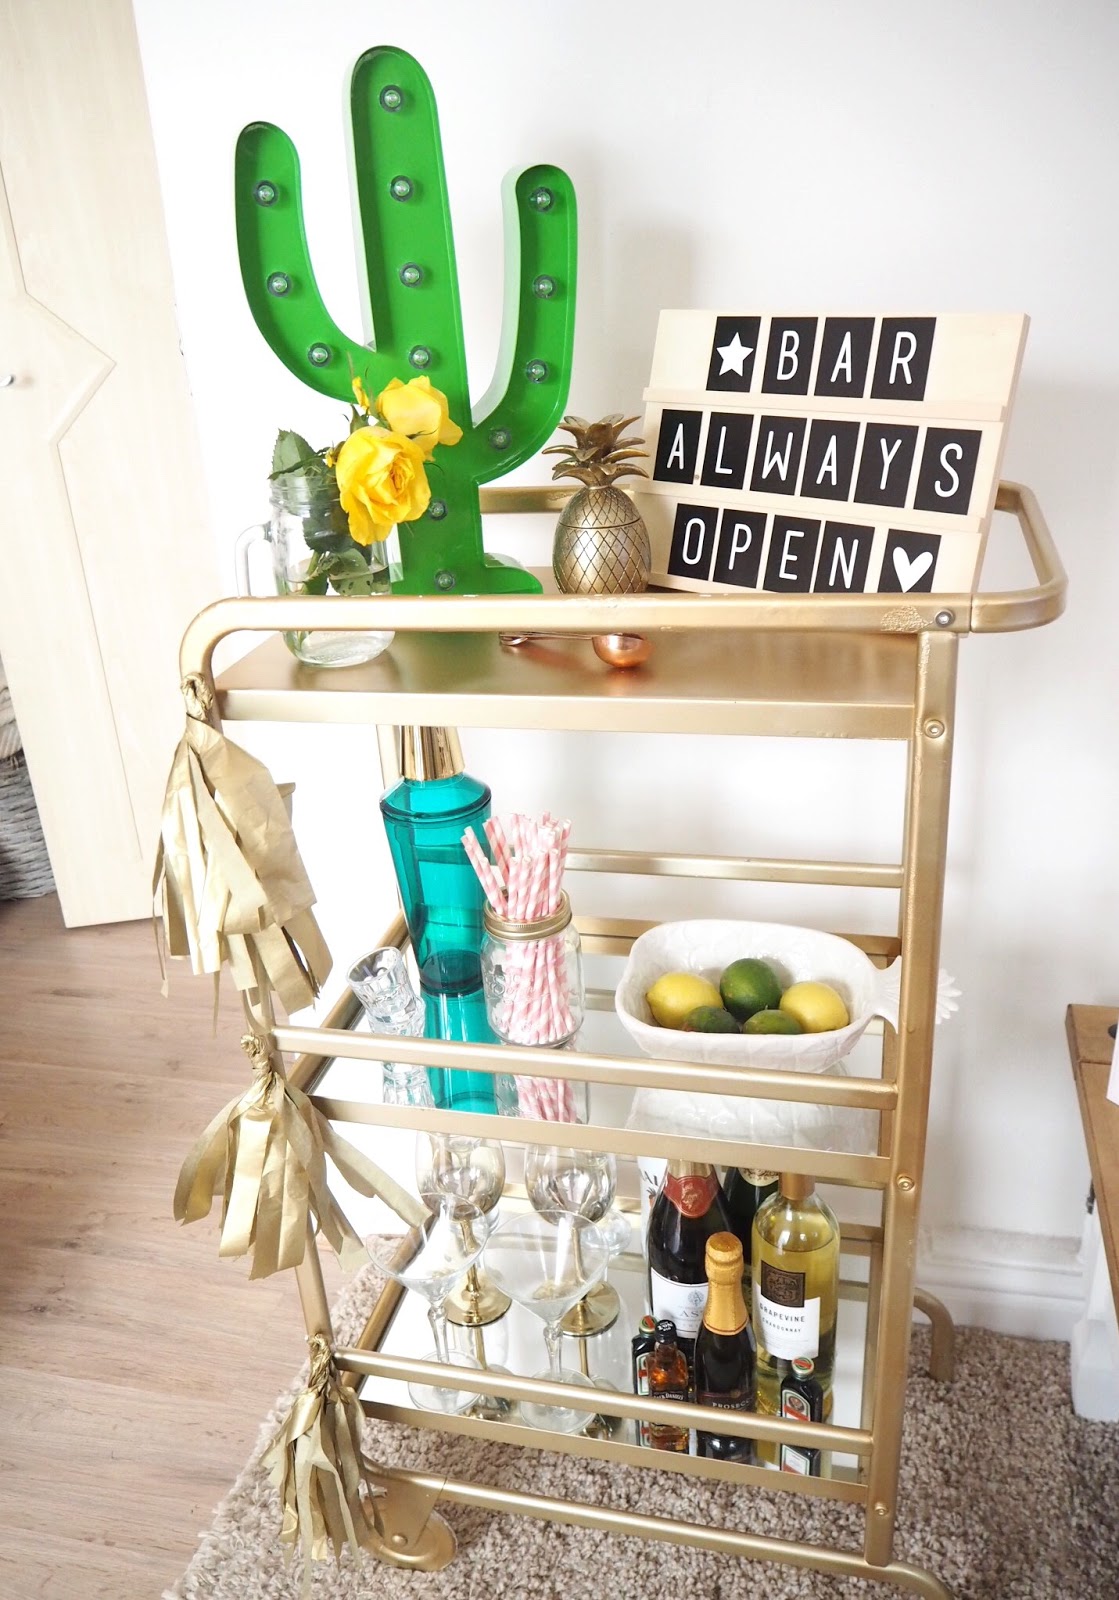 The Drinks Trolley: 15 Bar Carts To Buy and 6 Ways To Style It